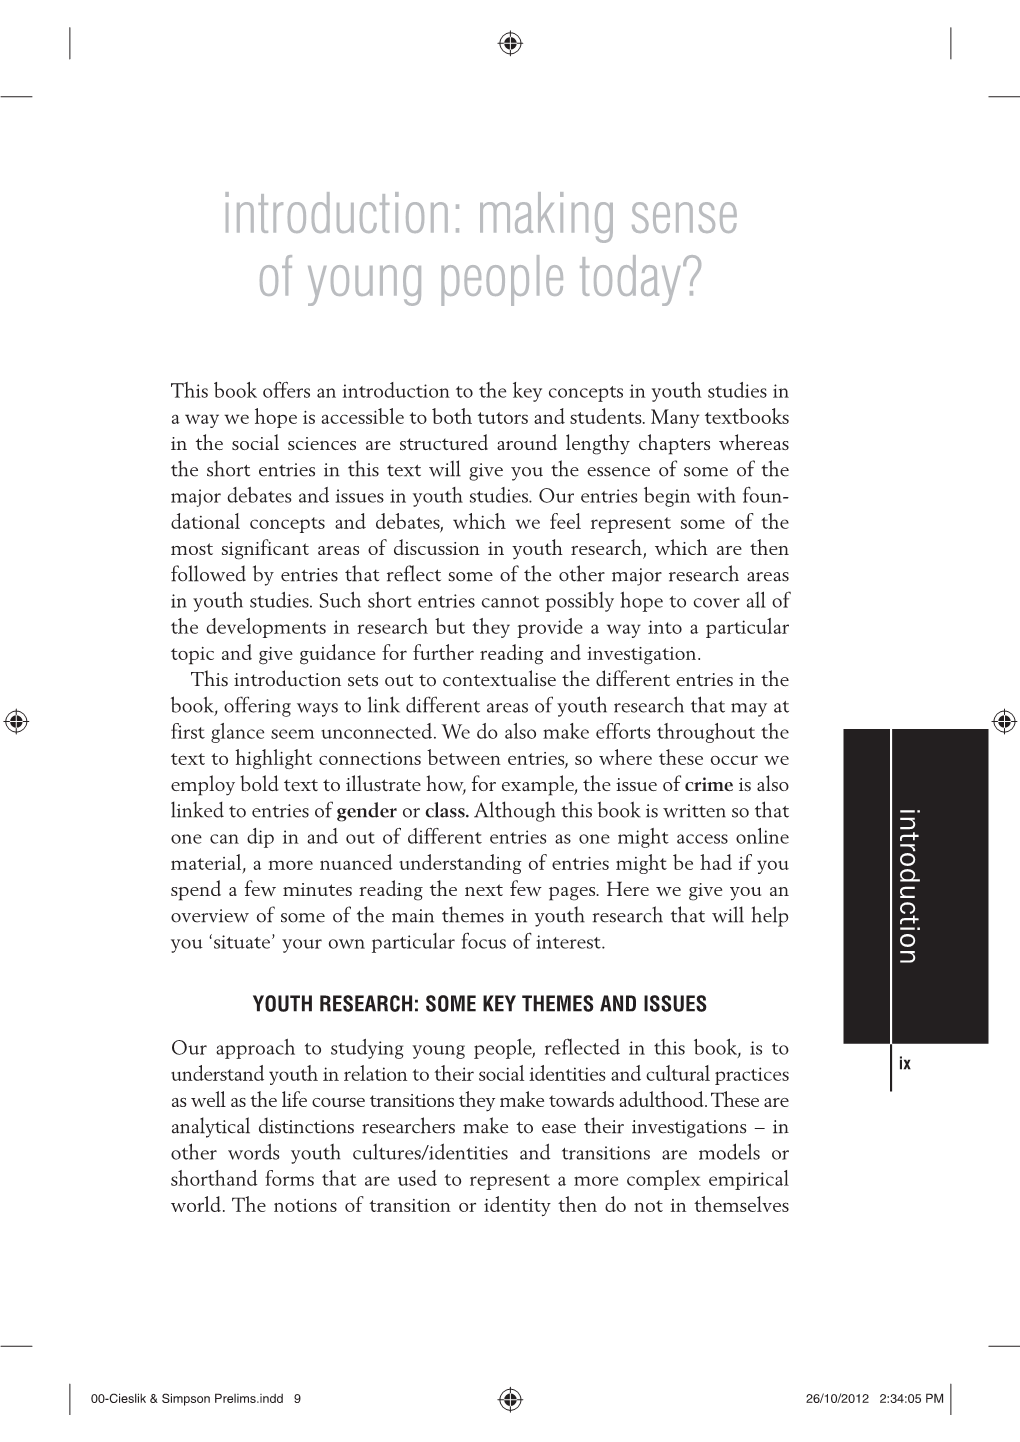 Introduction: Making Sense of Young People Today?